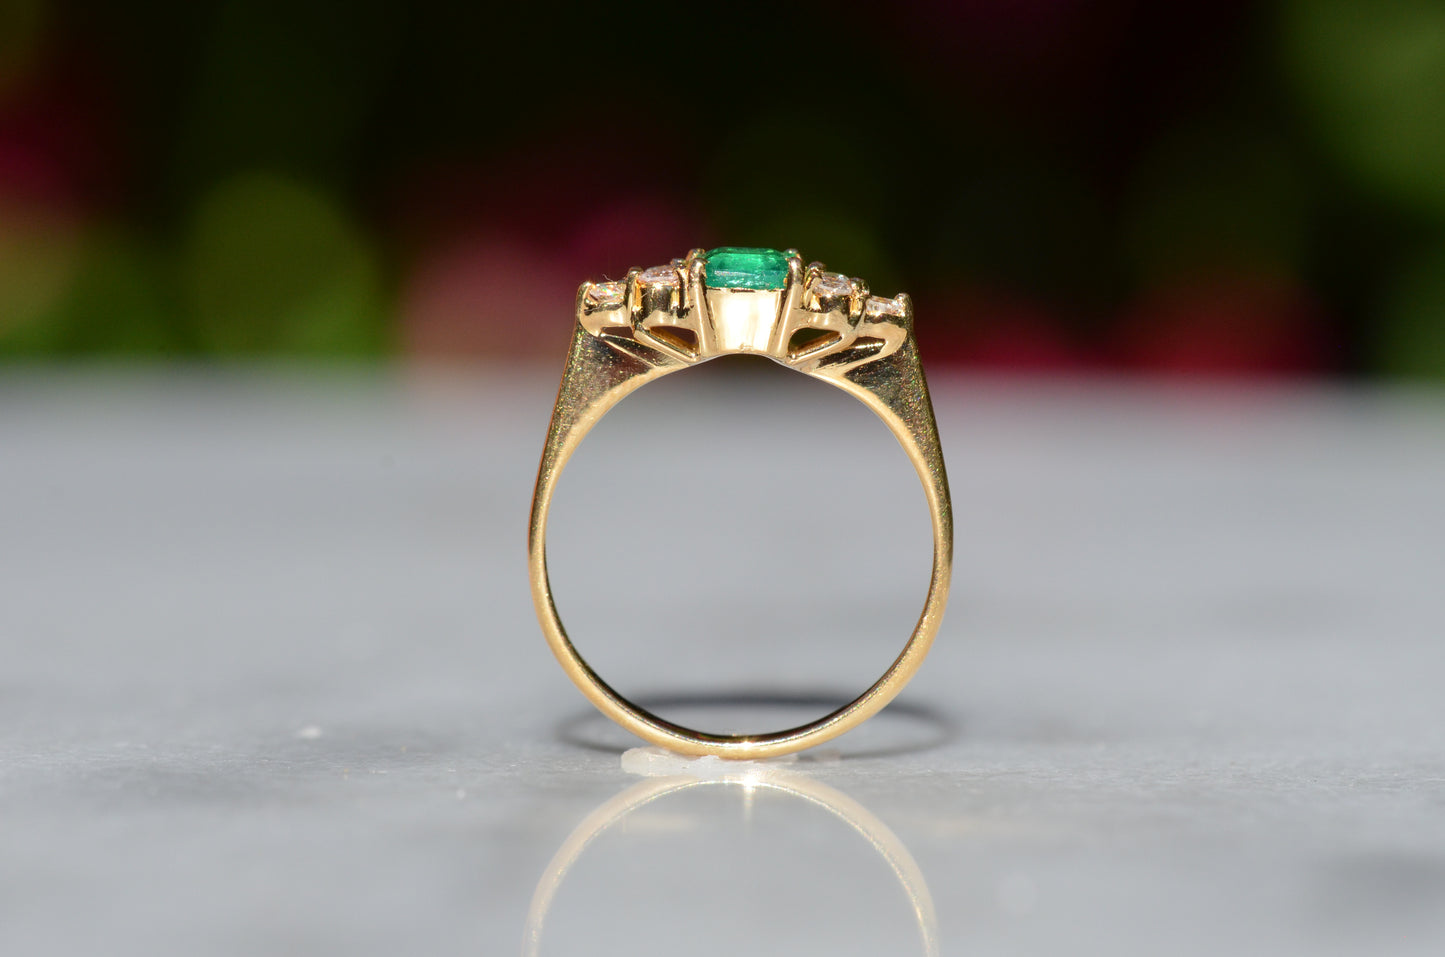 Close-cropped macro of a vintage ring, featuring a square emerald-cut emerald flanked by three round diamonds arranged in a triangular cluster on each shoulder. Viewed upright and looking through the finger hole to highlight the gallery of the mounting.